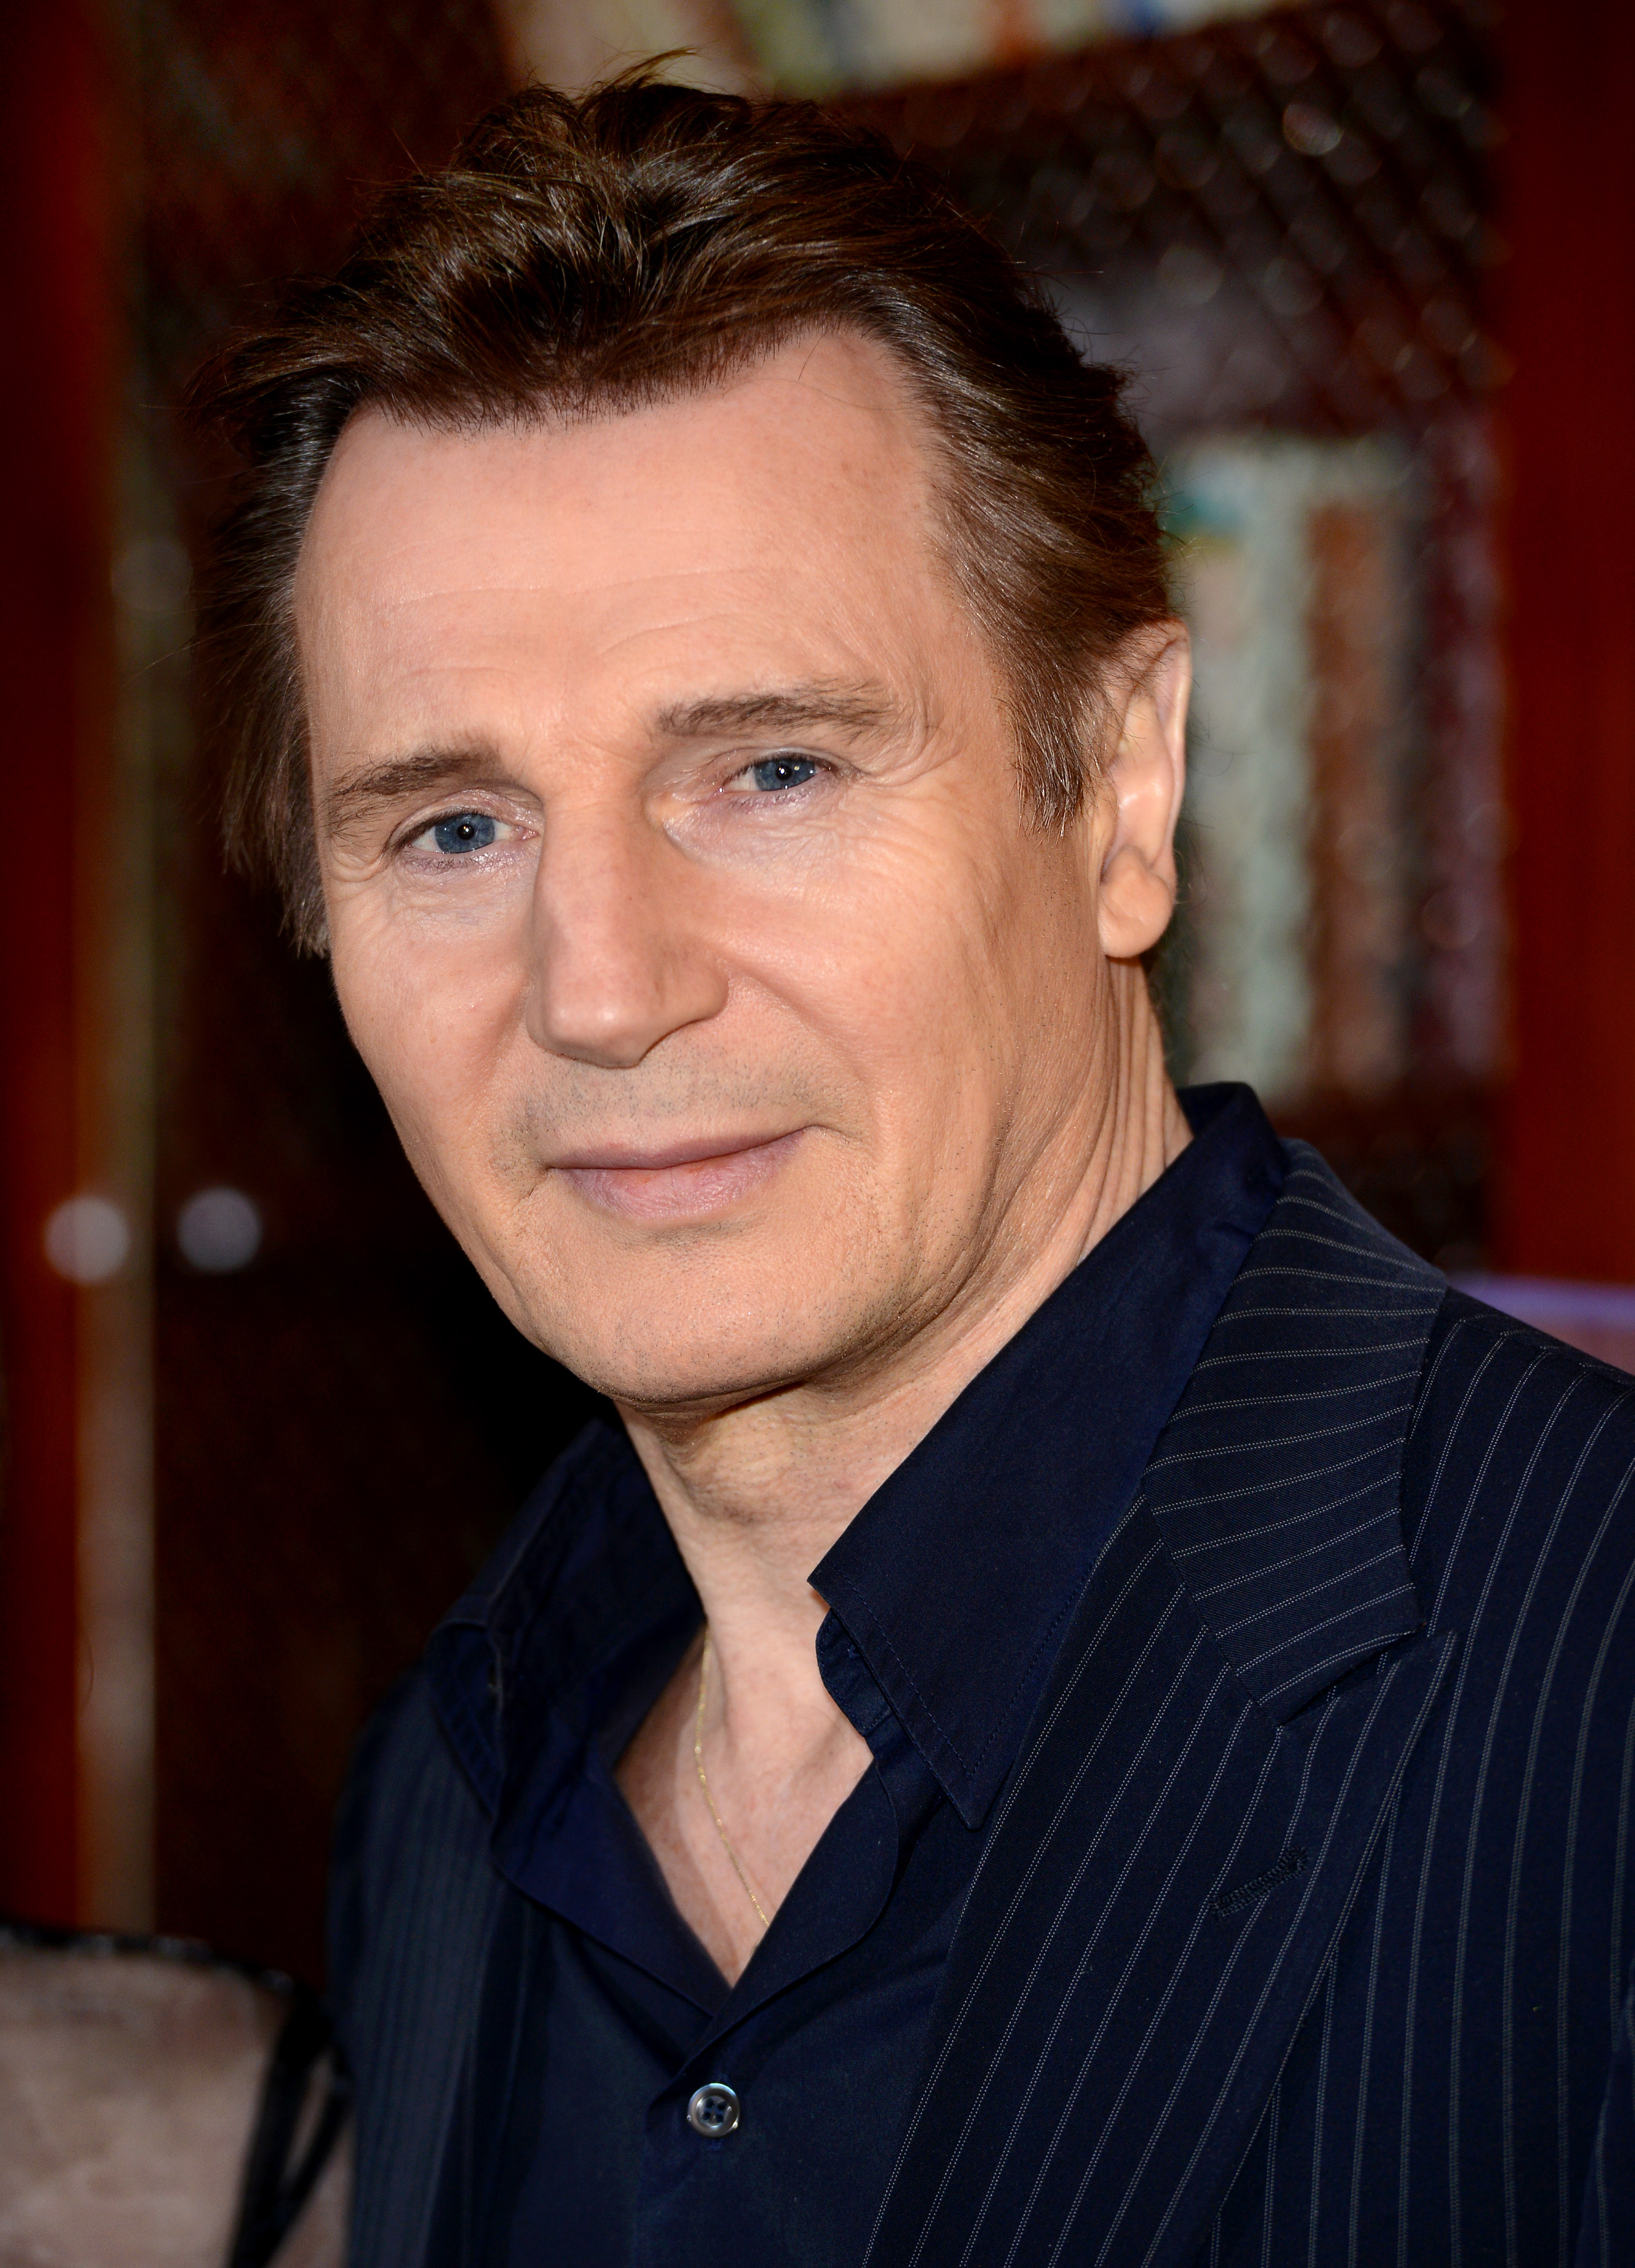 Liam Neeson attends a photocall for the film "Non Stop" at The Dorchester on January 30, 2014 in London, England. (Karwai Tang—WireImage)